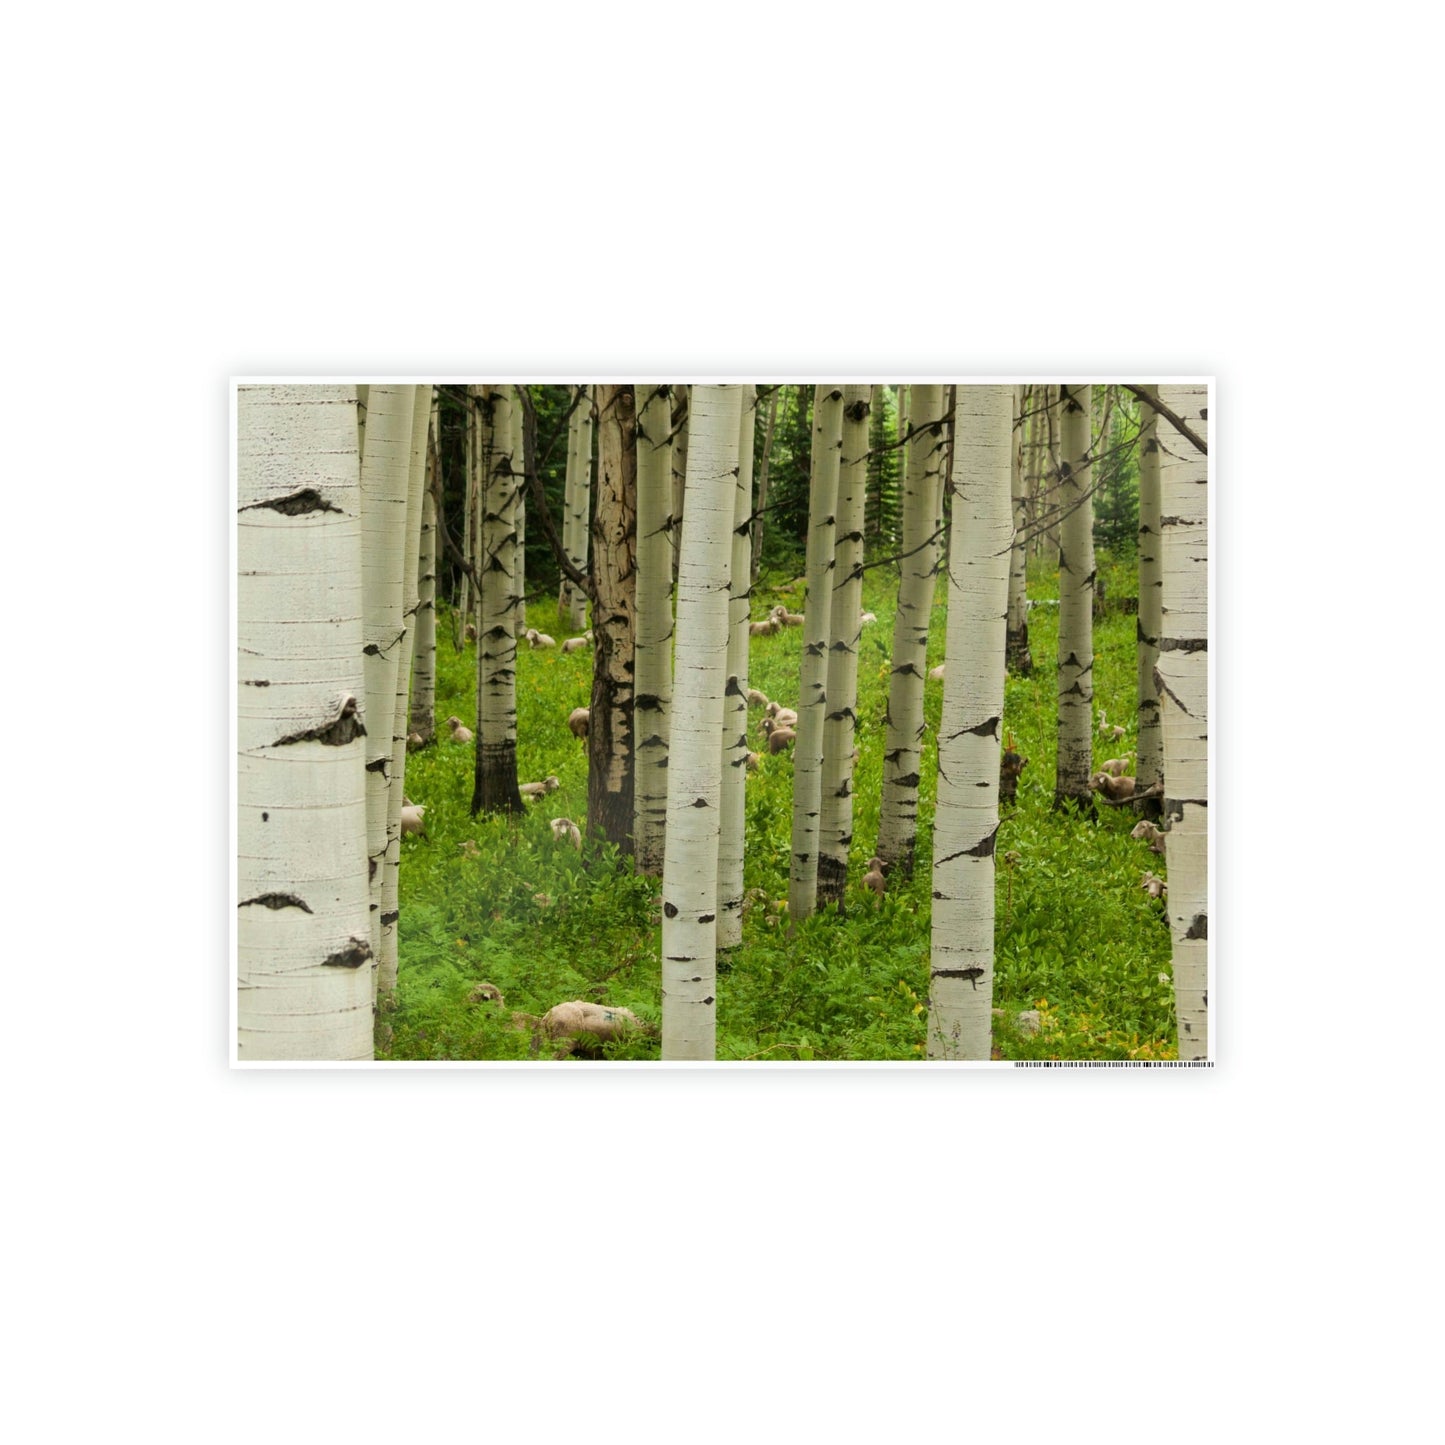 Silent Forest: Framed Poster of Birch Trees with a Tranquil Atmosphere